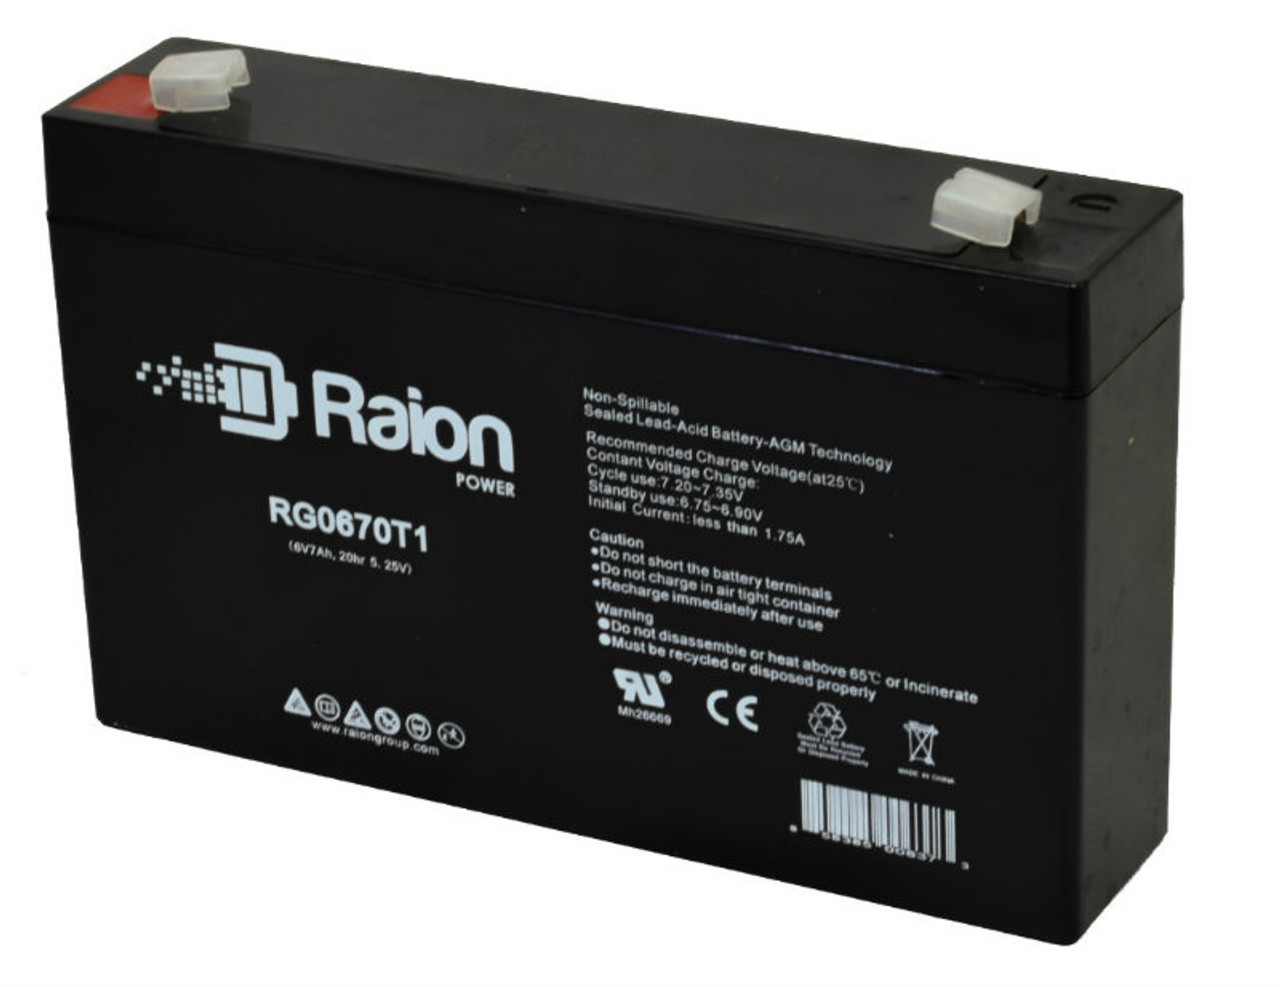 Raion Power RG0670T1 Replacement Battery for XNB SN06007 OEM Battery